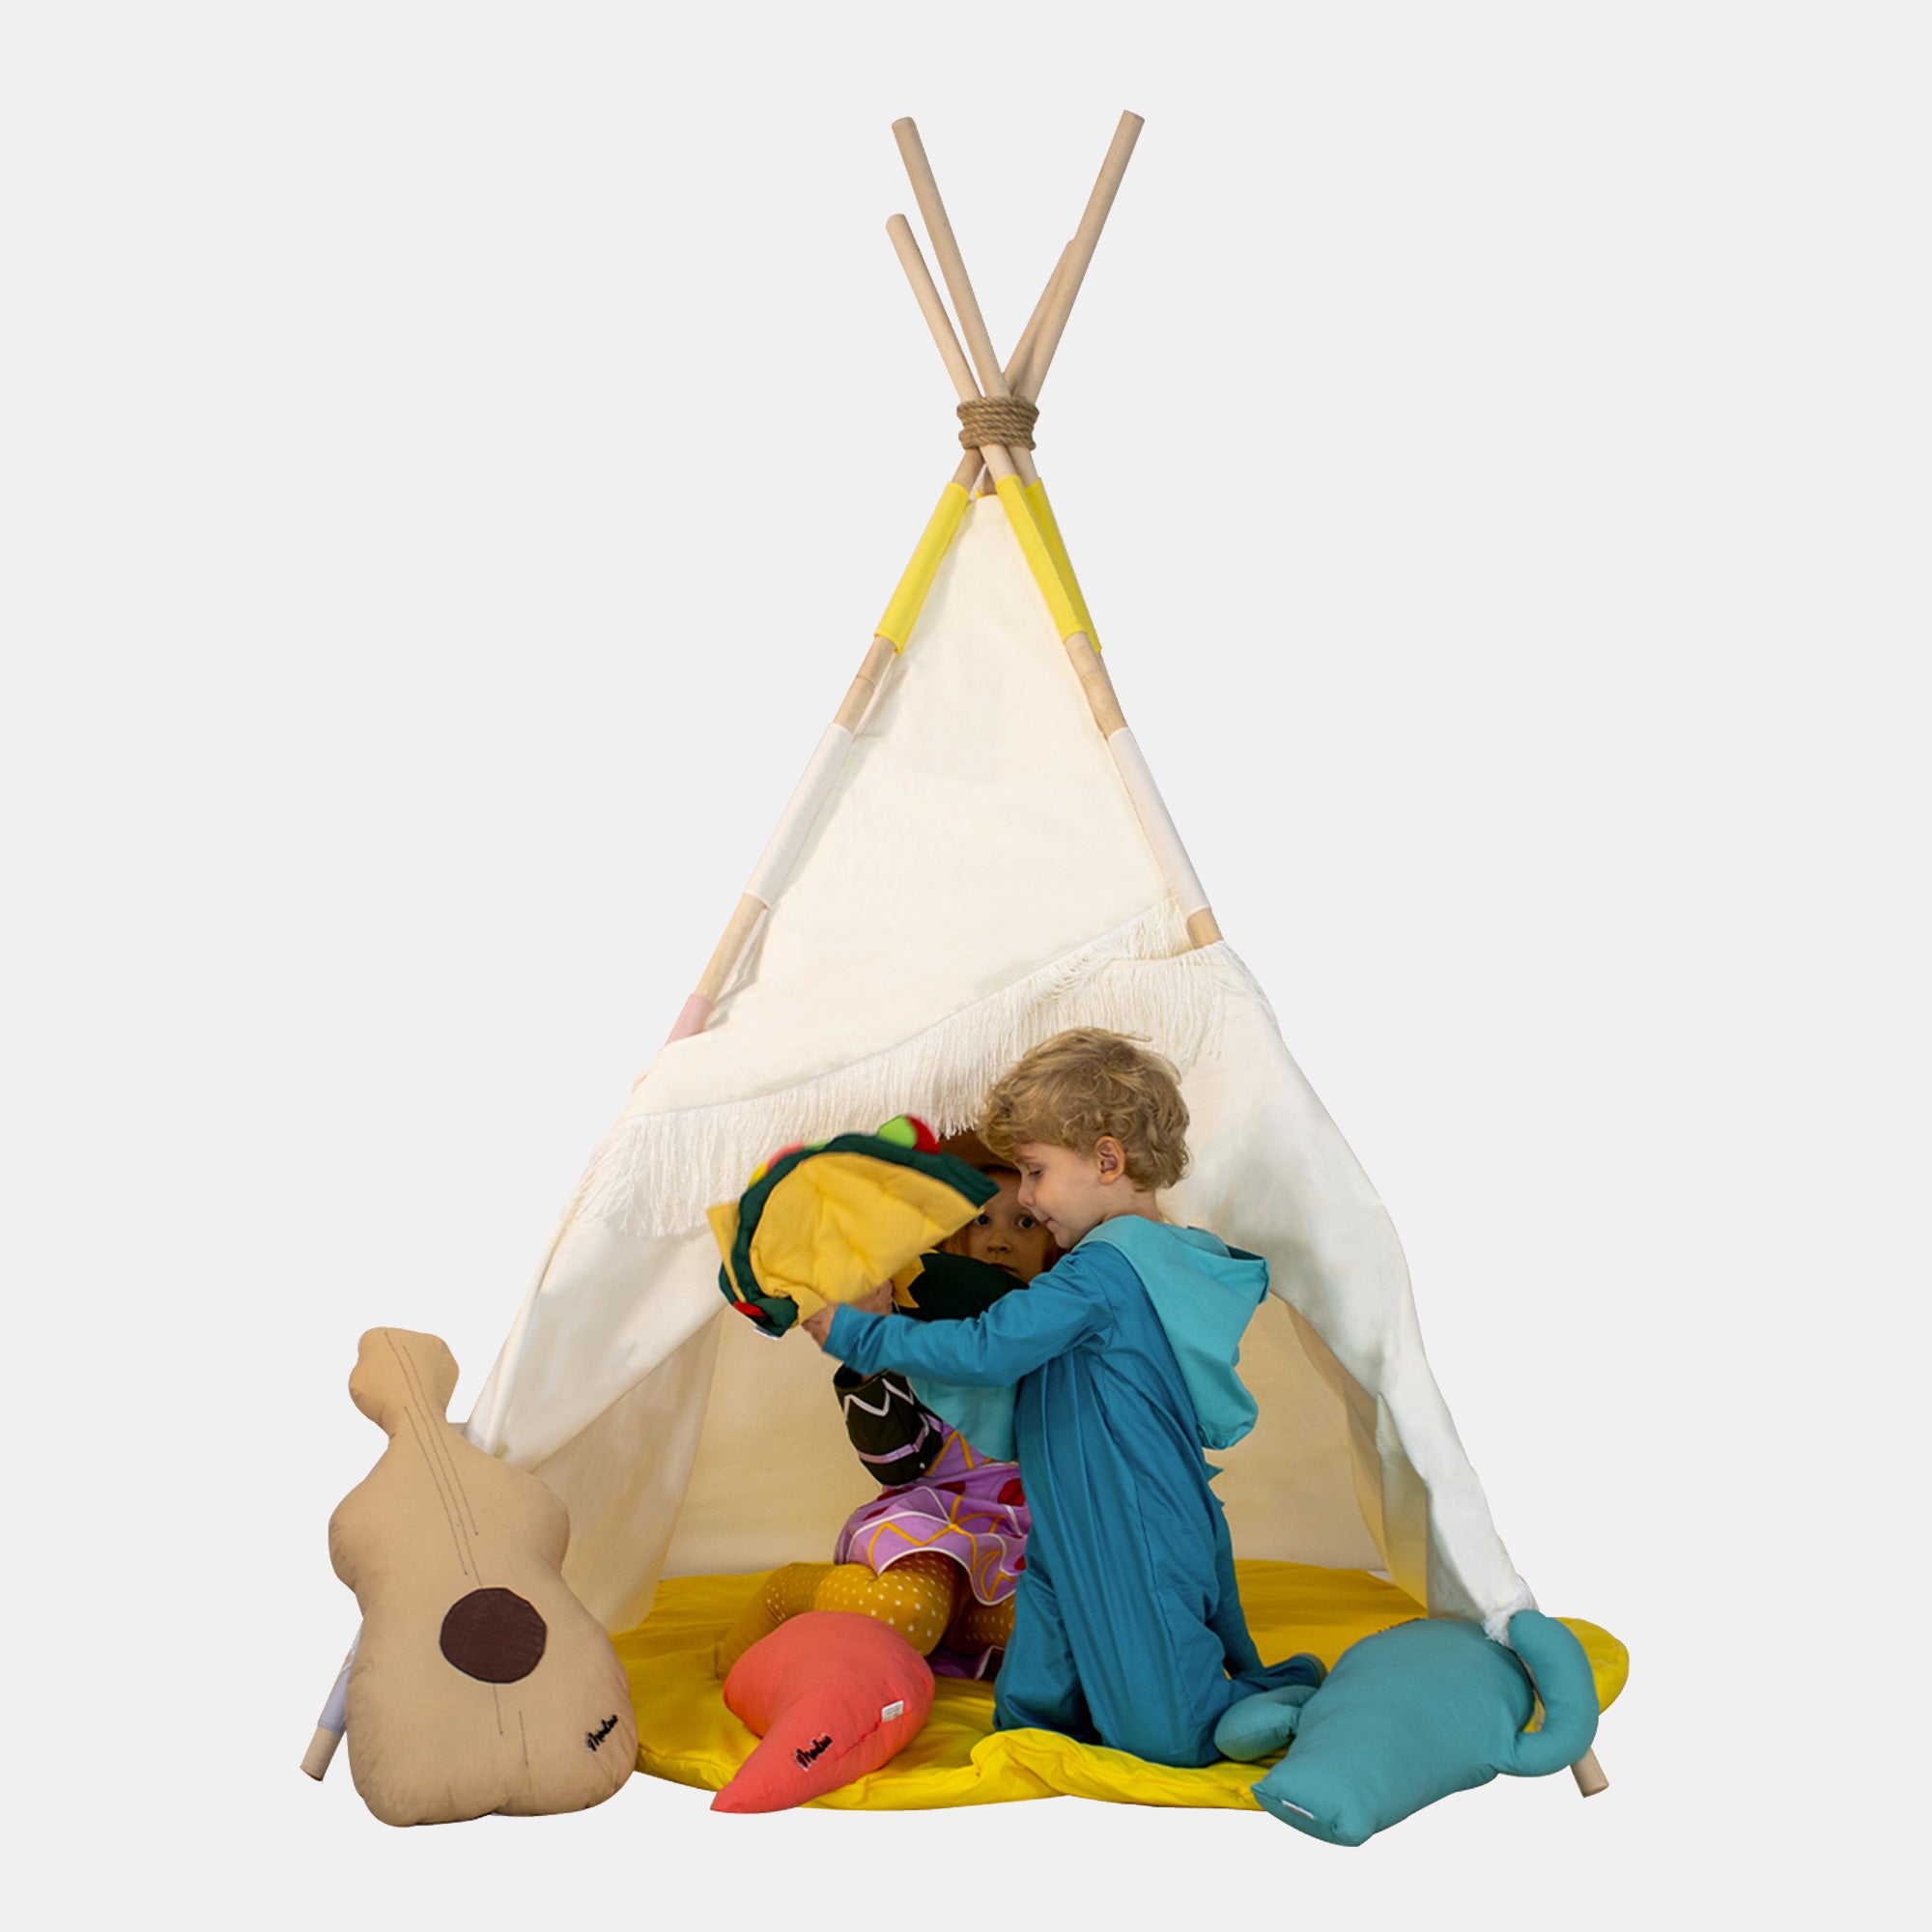 Mexican Style Children's Teepee Tent